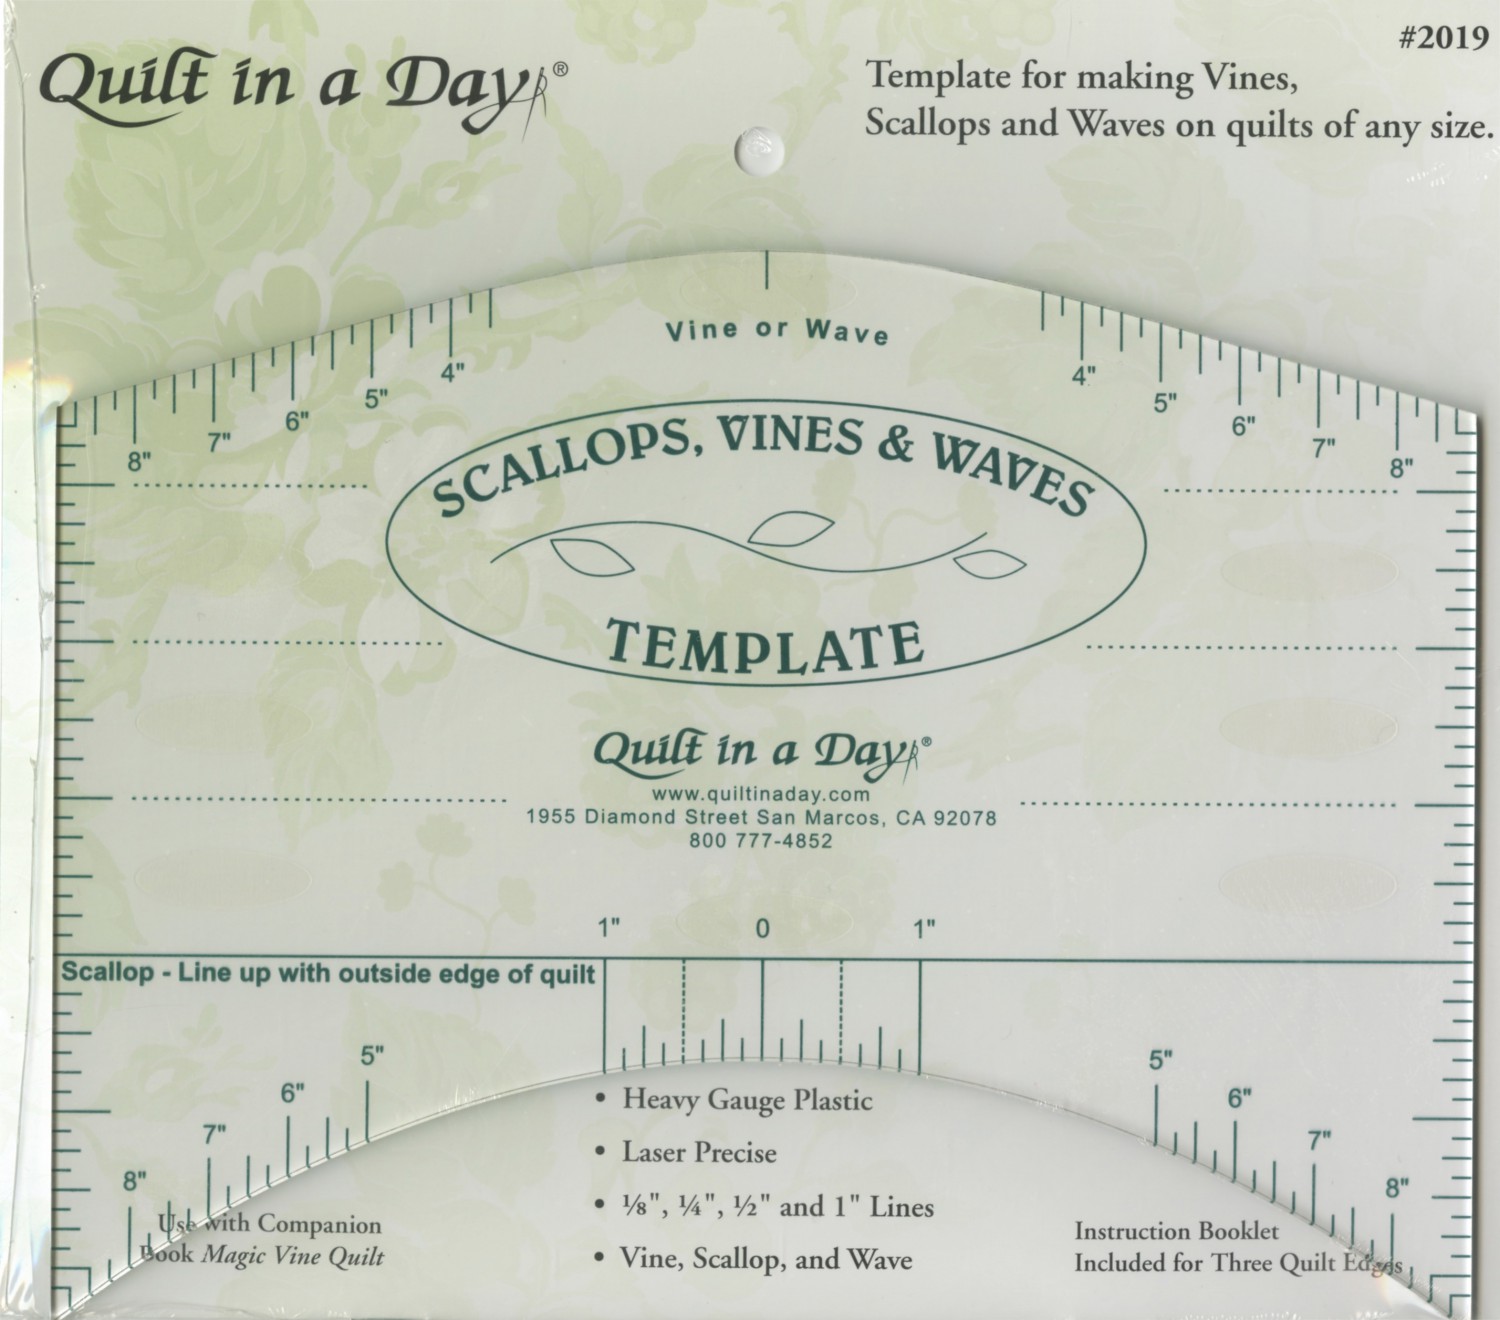 Scallops, Vines and Waves Template